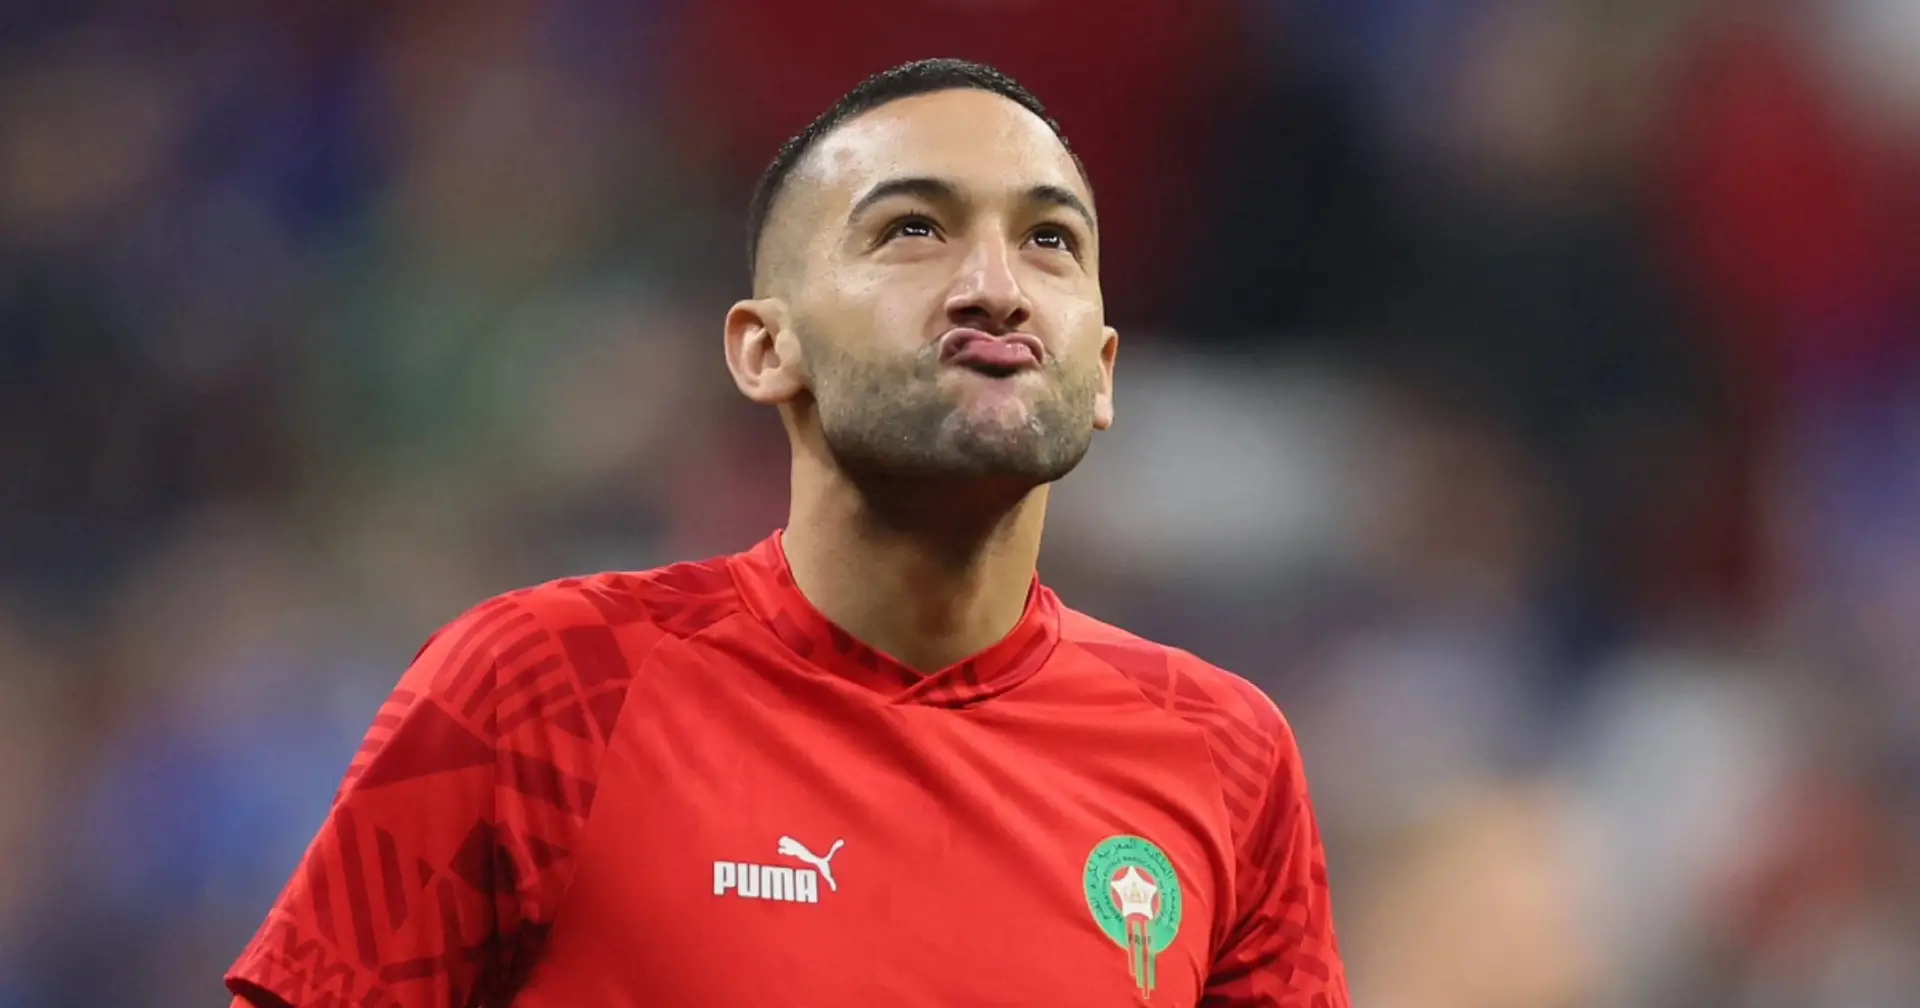 'We can talk about that for a long time': Hakim Ziyech on what went wrong for him at Chelsea